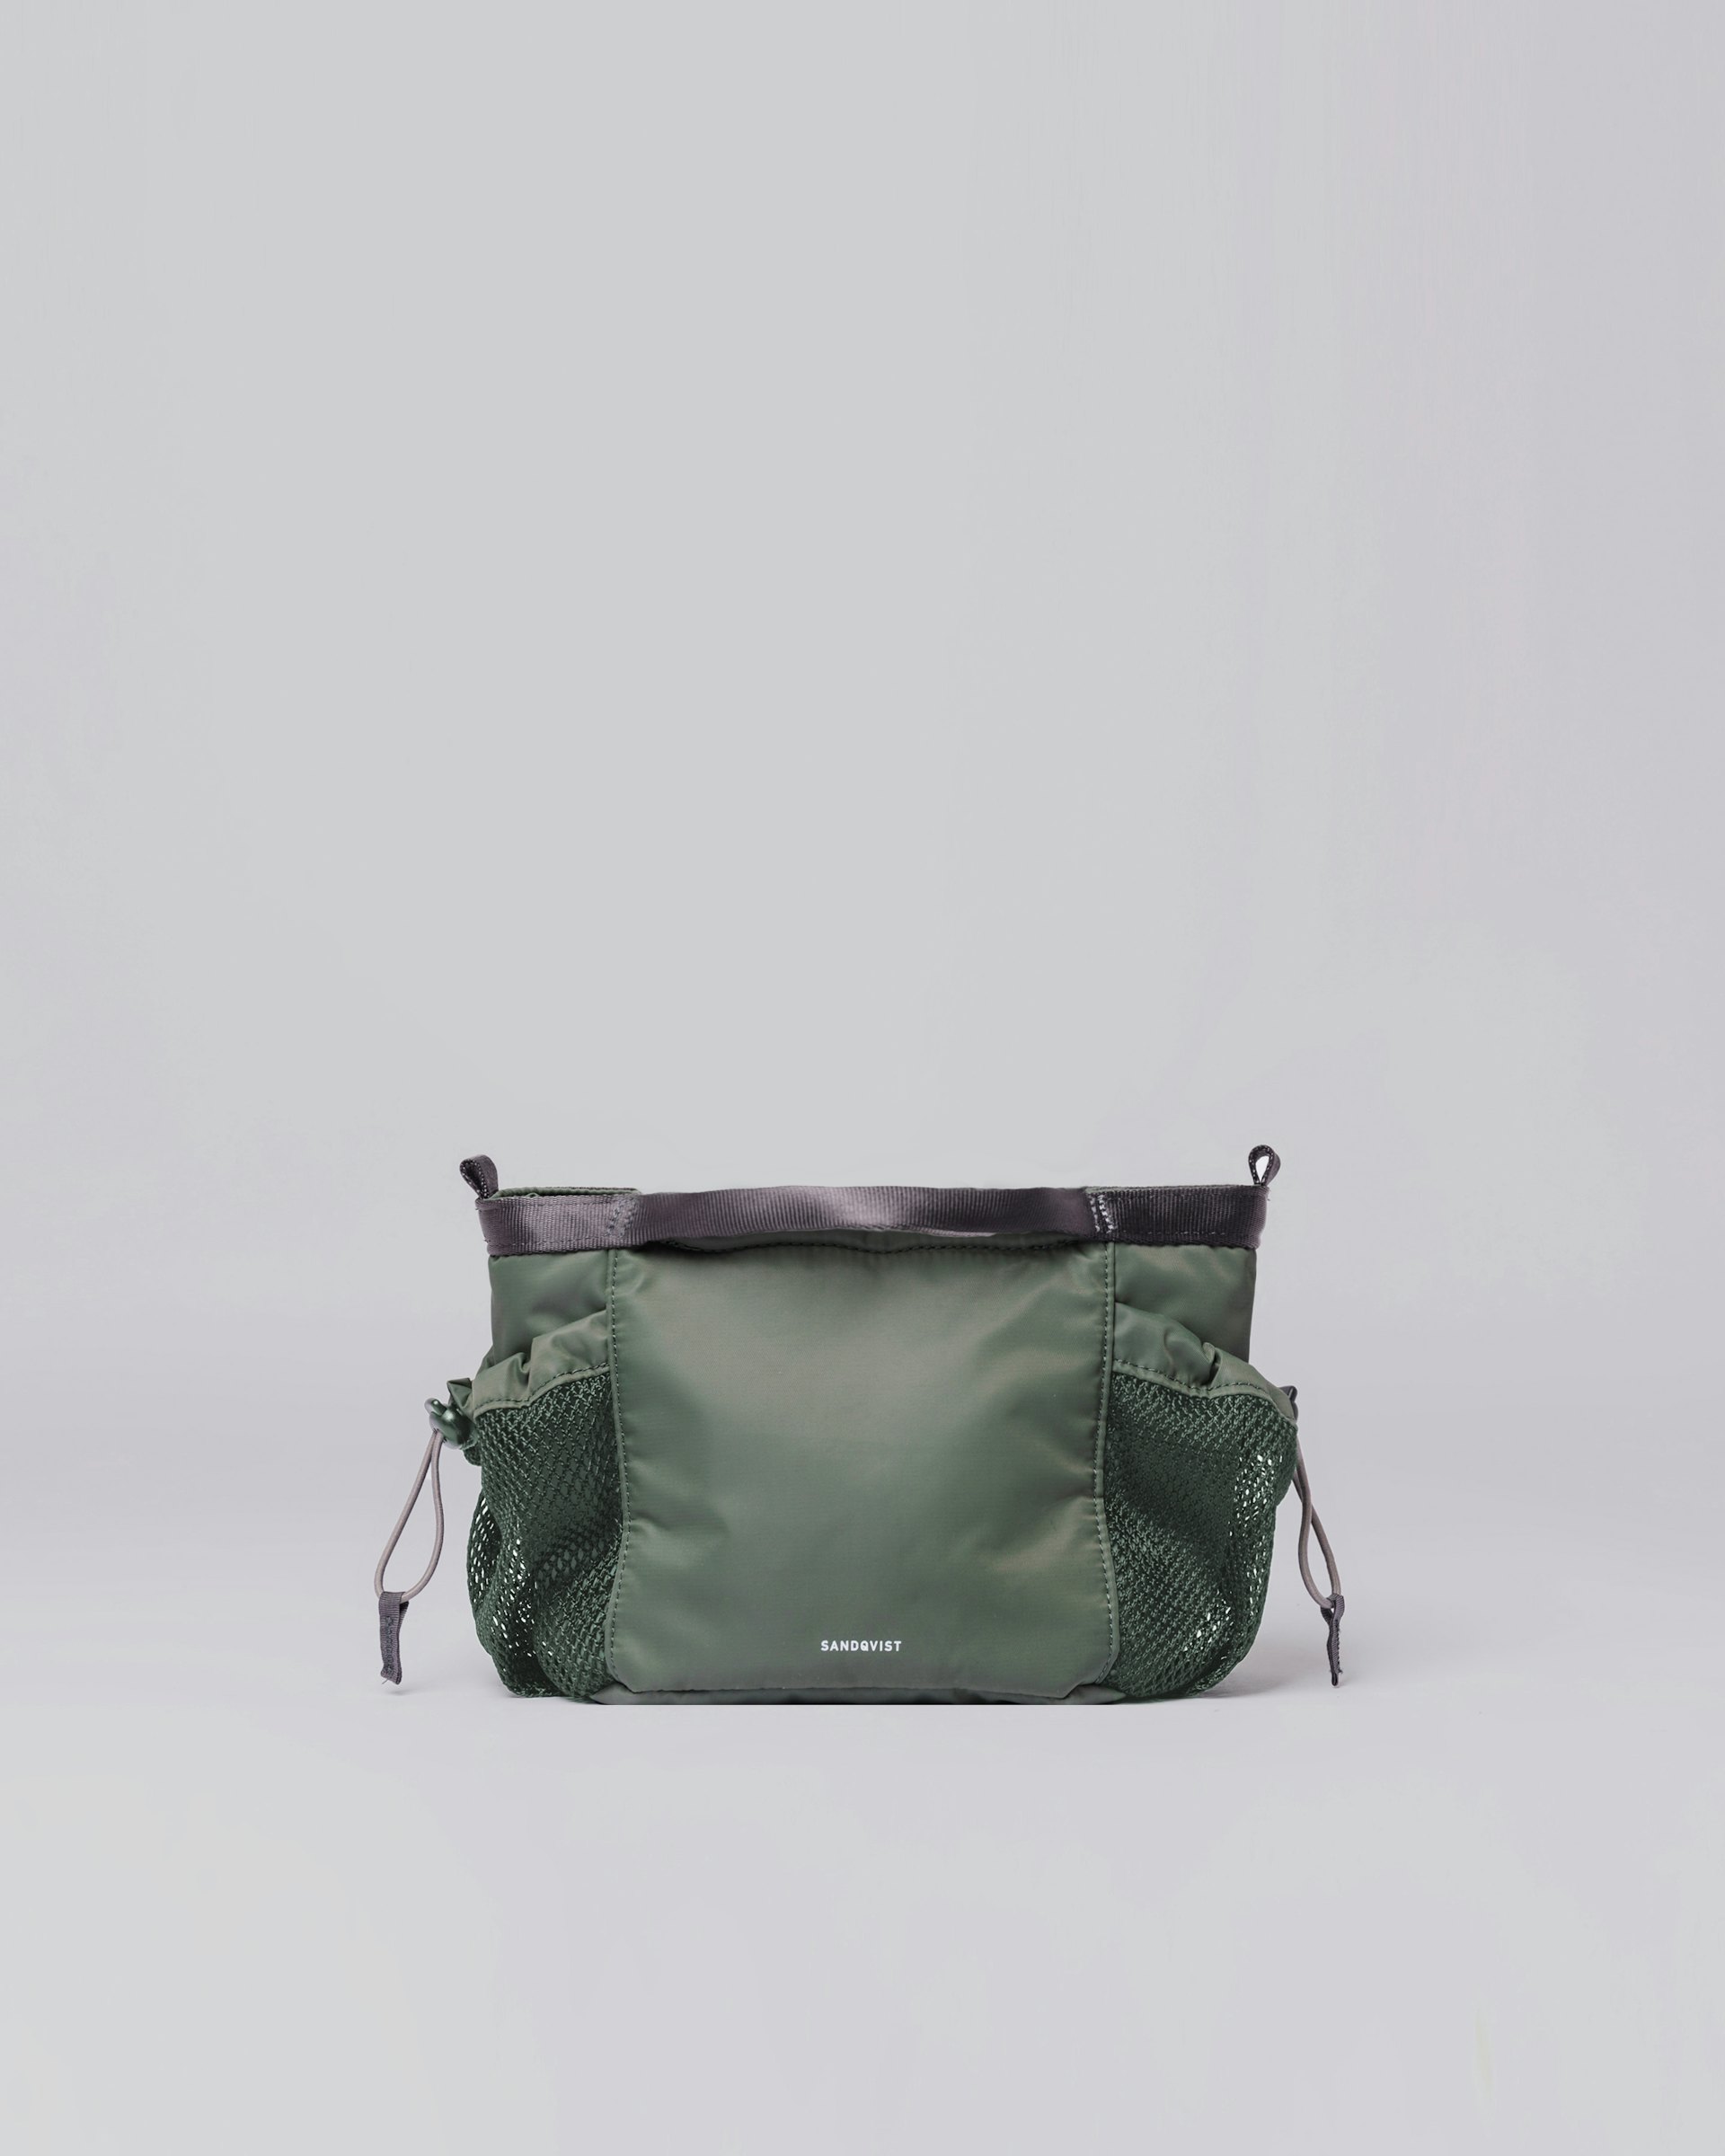 Stevie belongs to the category Shoulder bags and is in color lichen green